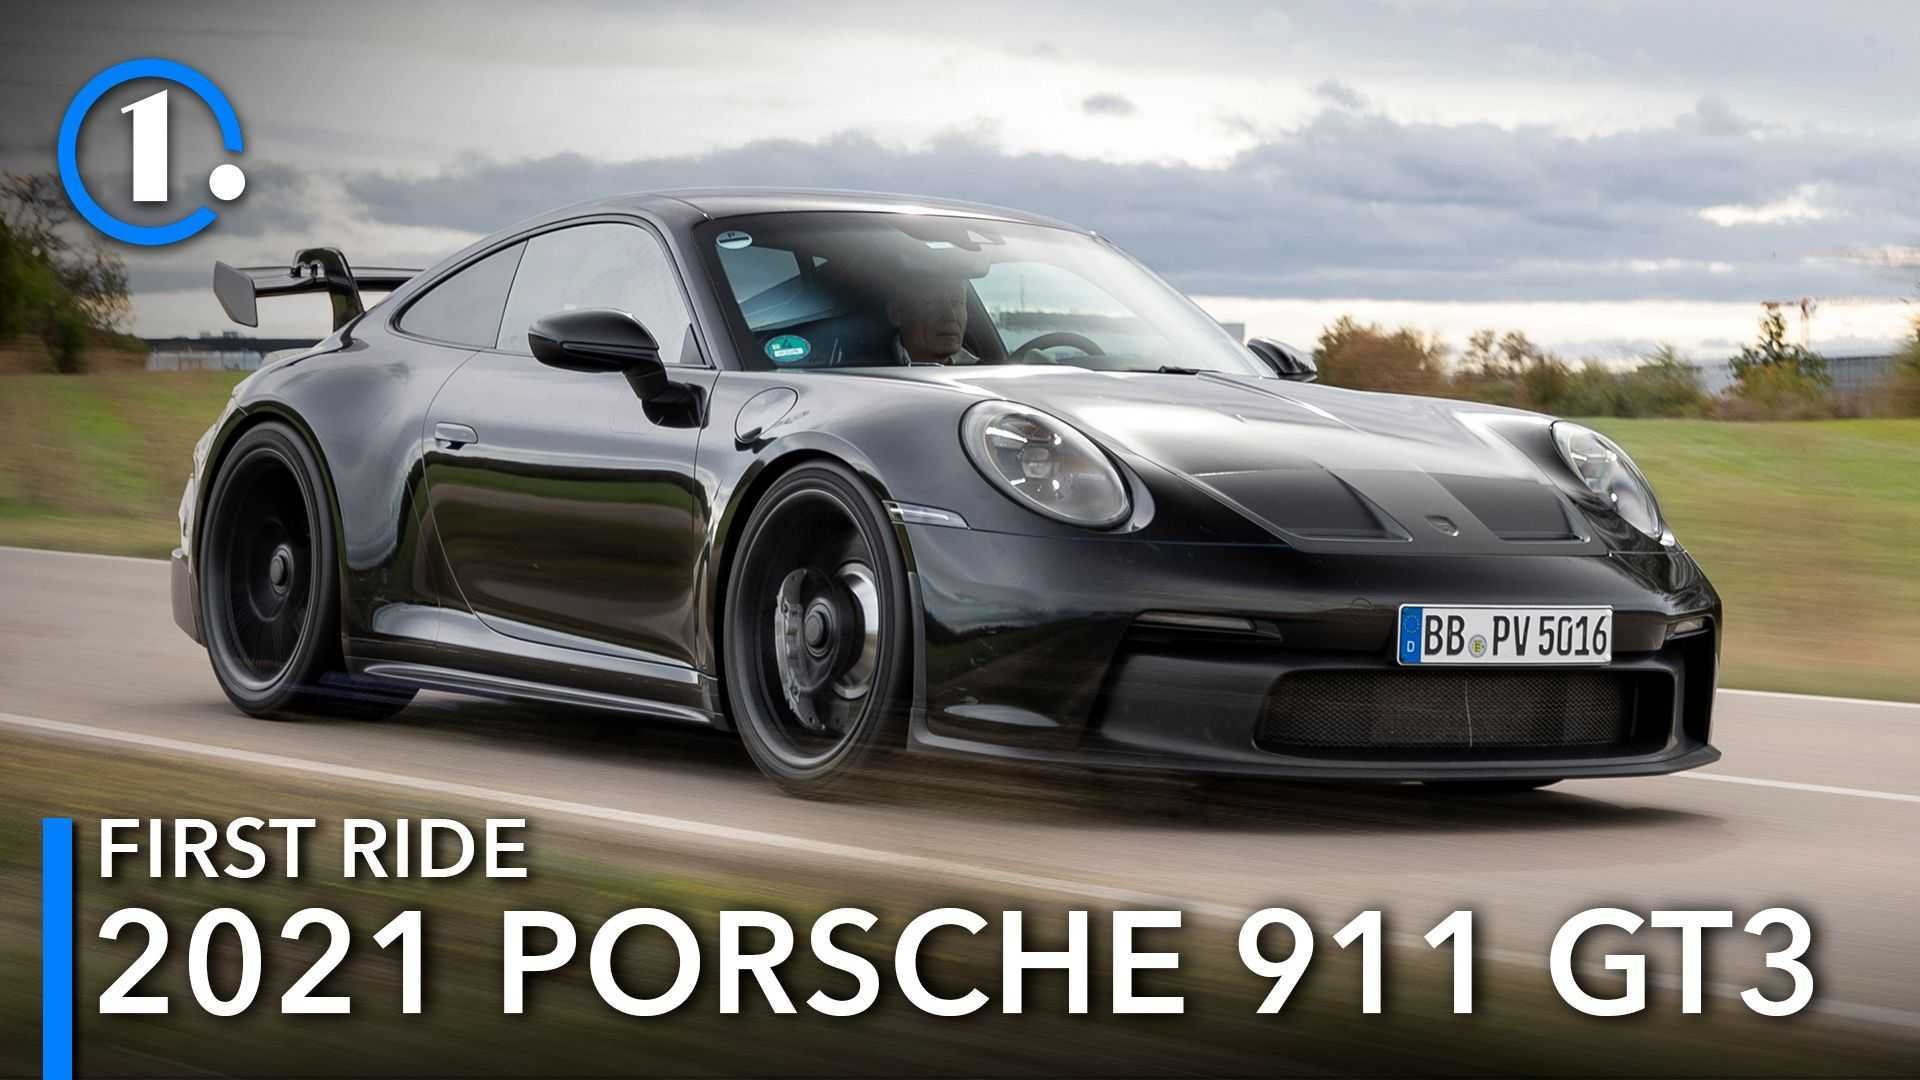 2021 Porsche 911 GT3 Prototype First Ride Review: Waiting For Our Turn